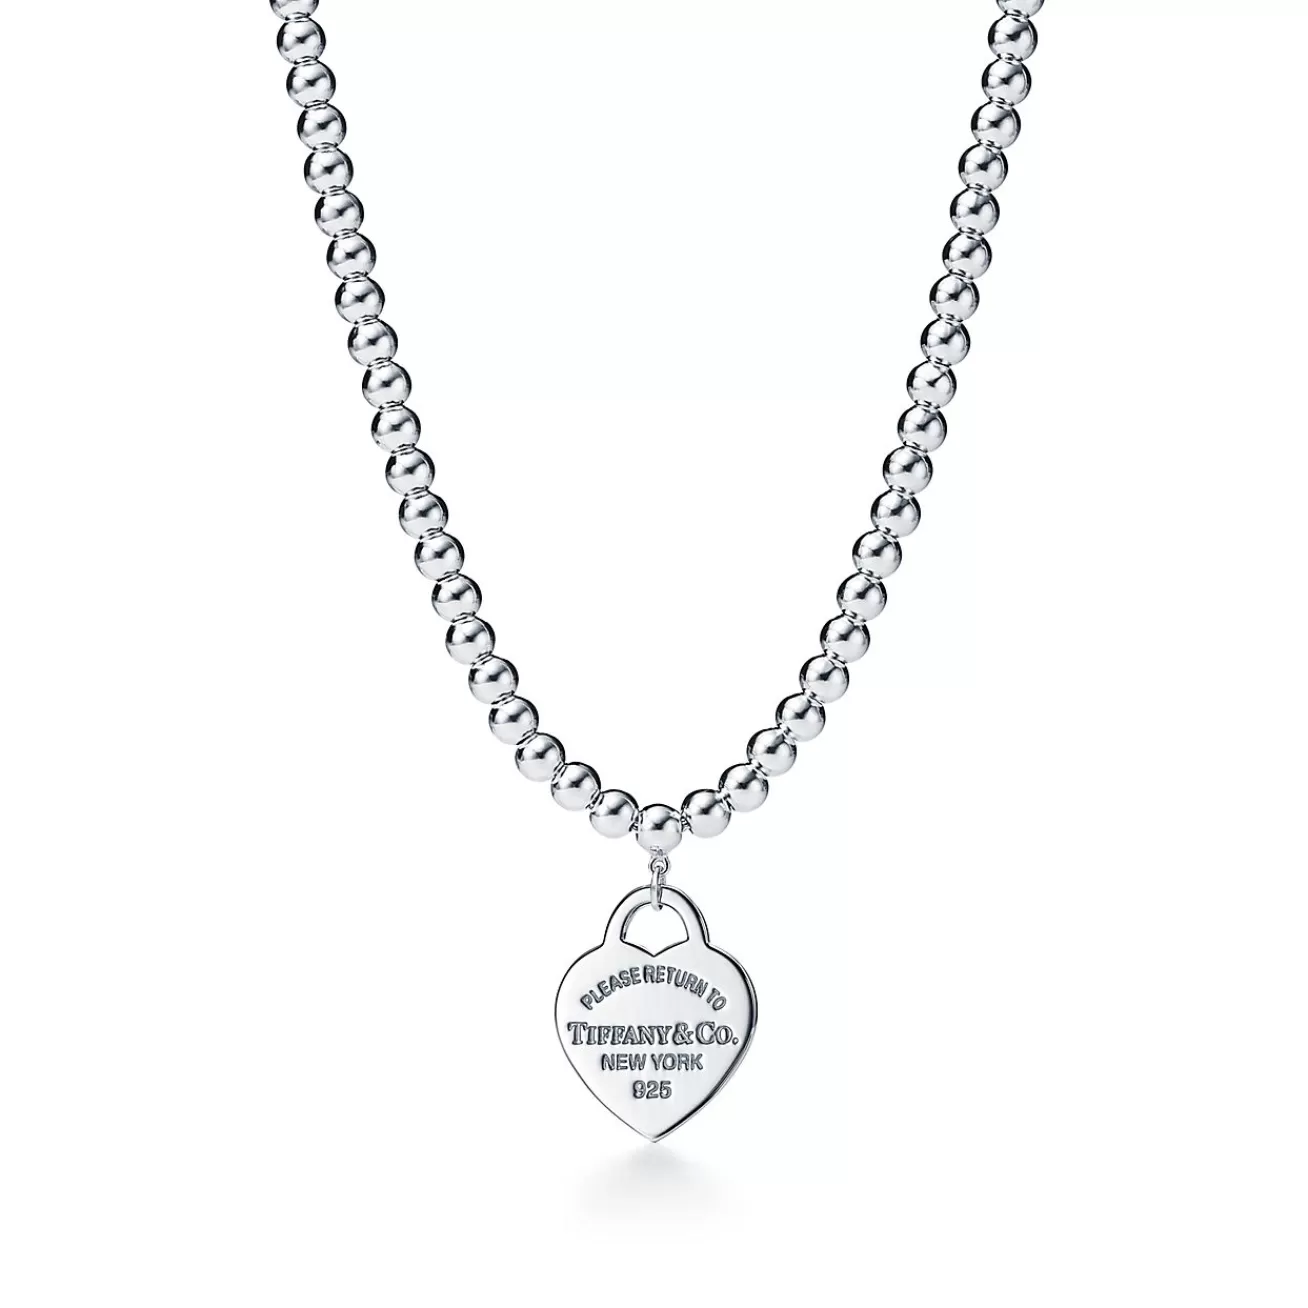 Tiffany & Co. Return to Tiffany® small heart tag in sterling silver on a bead necklace. | ^ Necklaces & Pendants | Gifts for Her